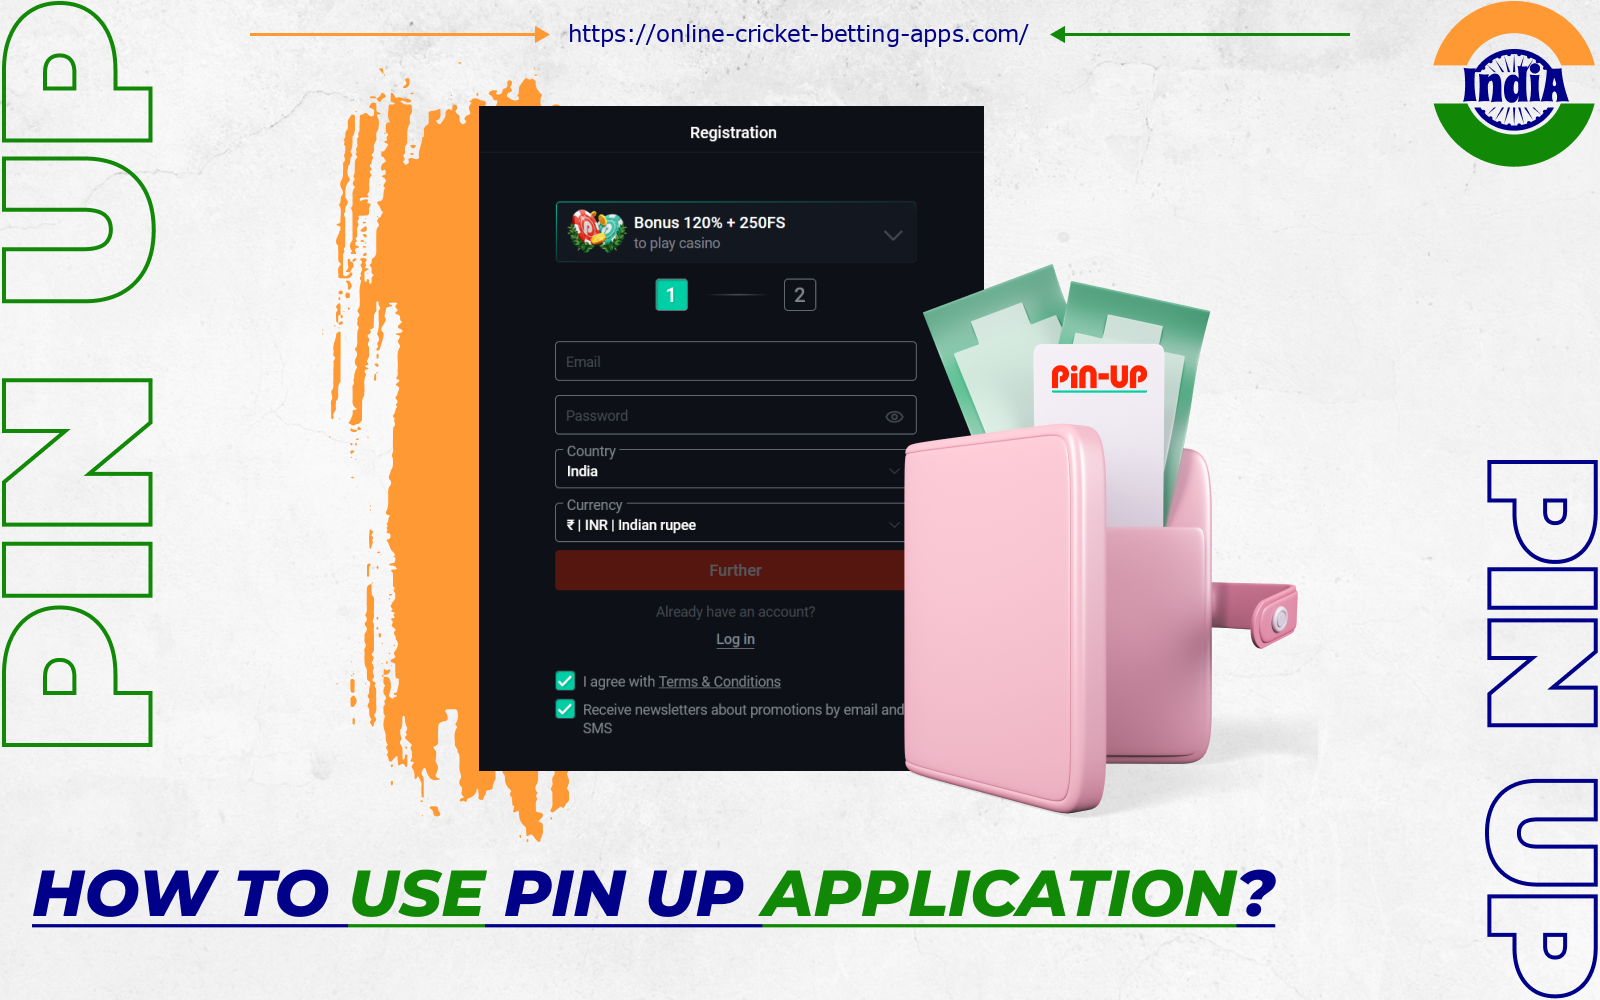 To start betting on the Pin Up app Indian users need to register and make a deposit